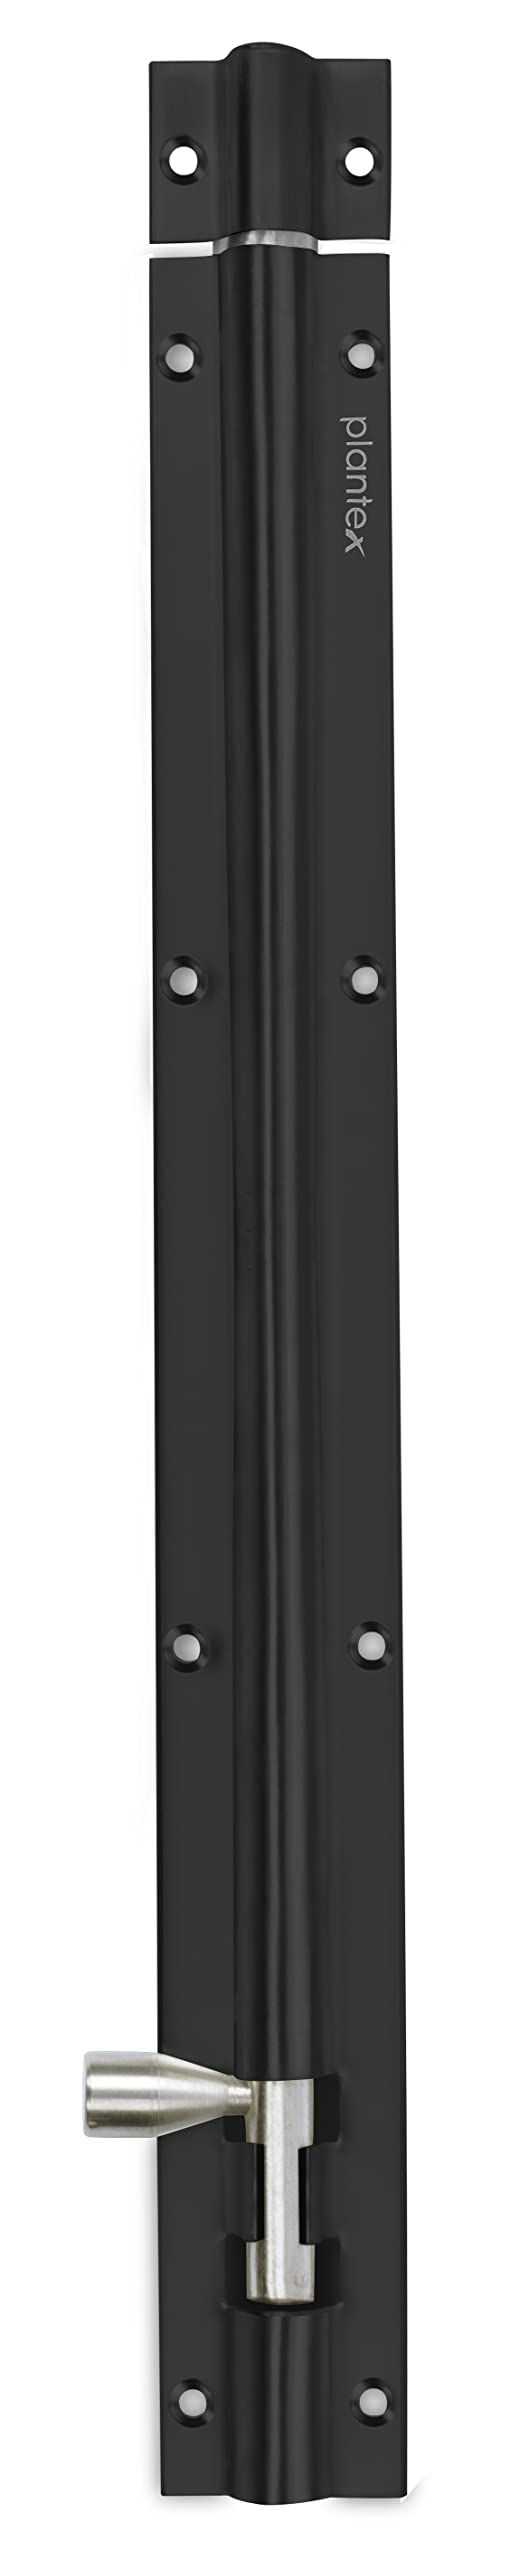 Plantex Black Tower Bolt for Windows/Doors/Wardrobe - 12-inches (Pack of 8)